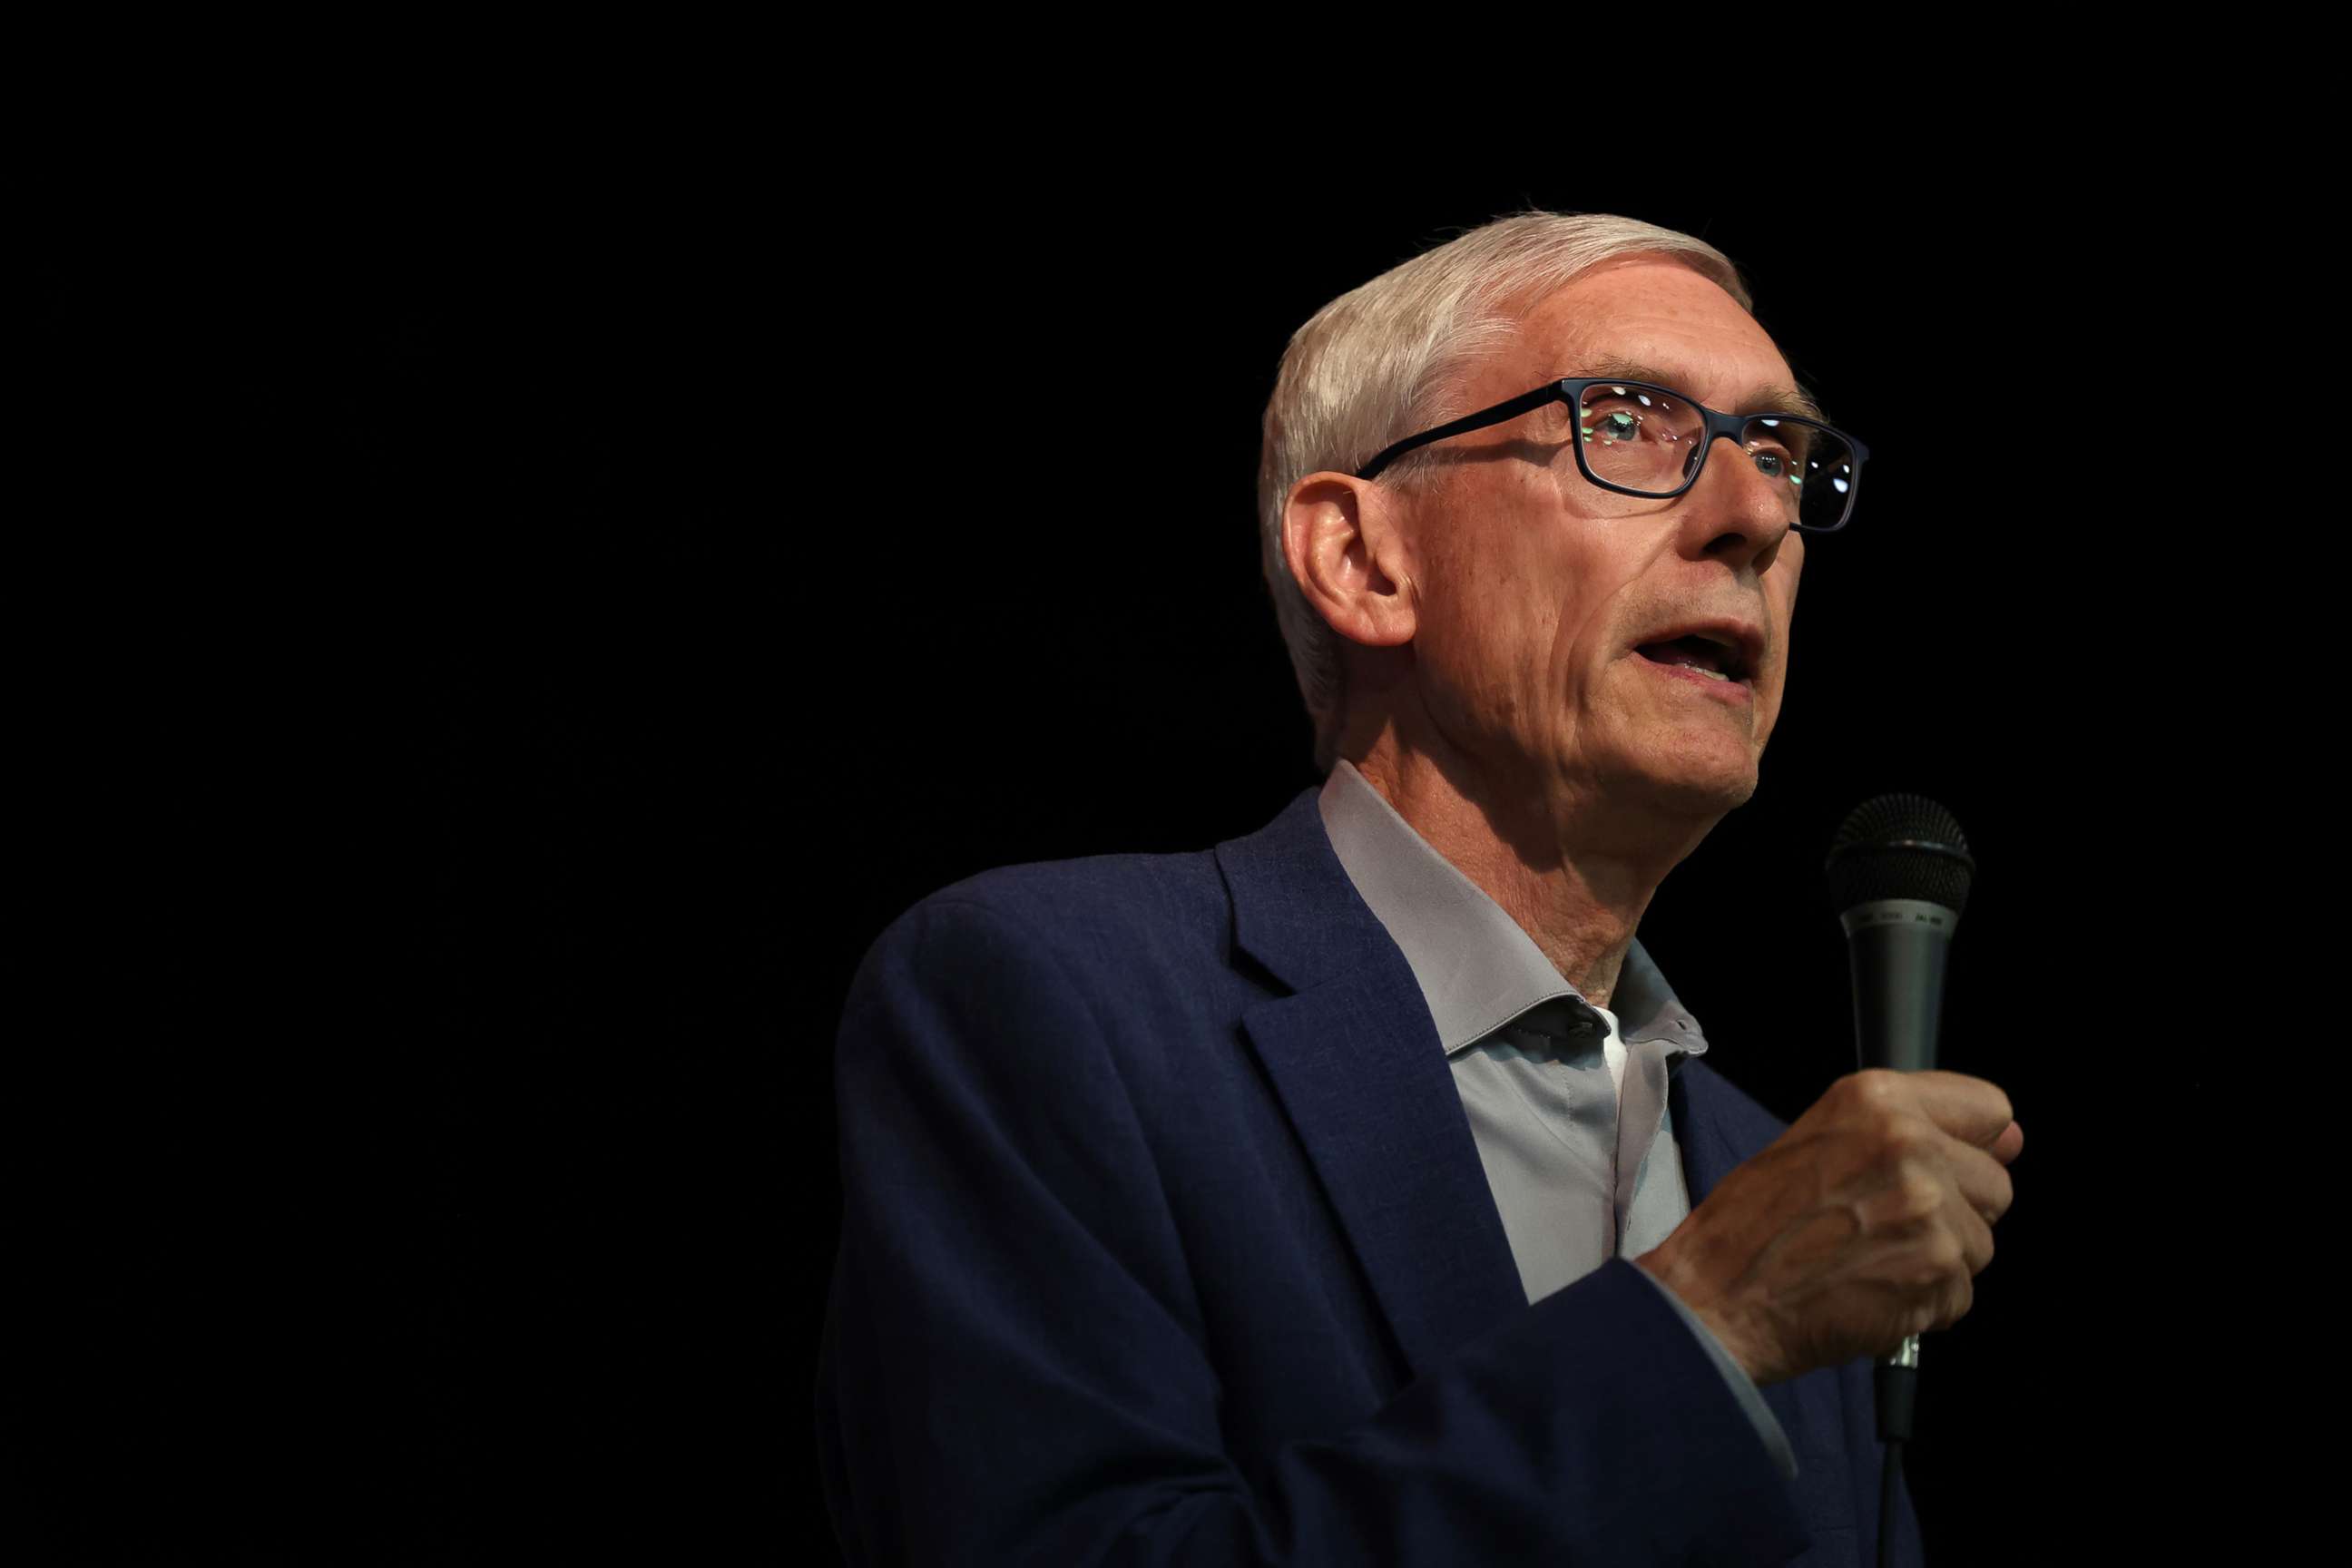 PHOTO: Wisconsin Governor Tony Evers speaks during a campaign rally in Milwaukee, Sept. 24, 2022.